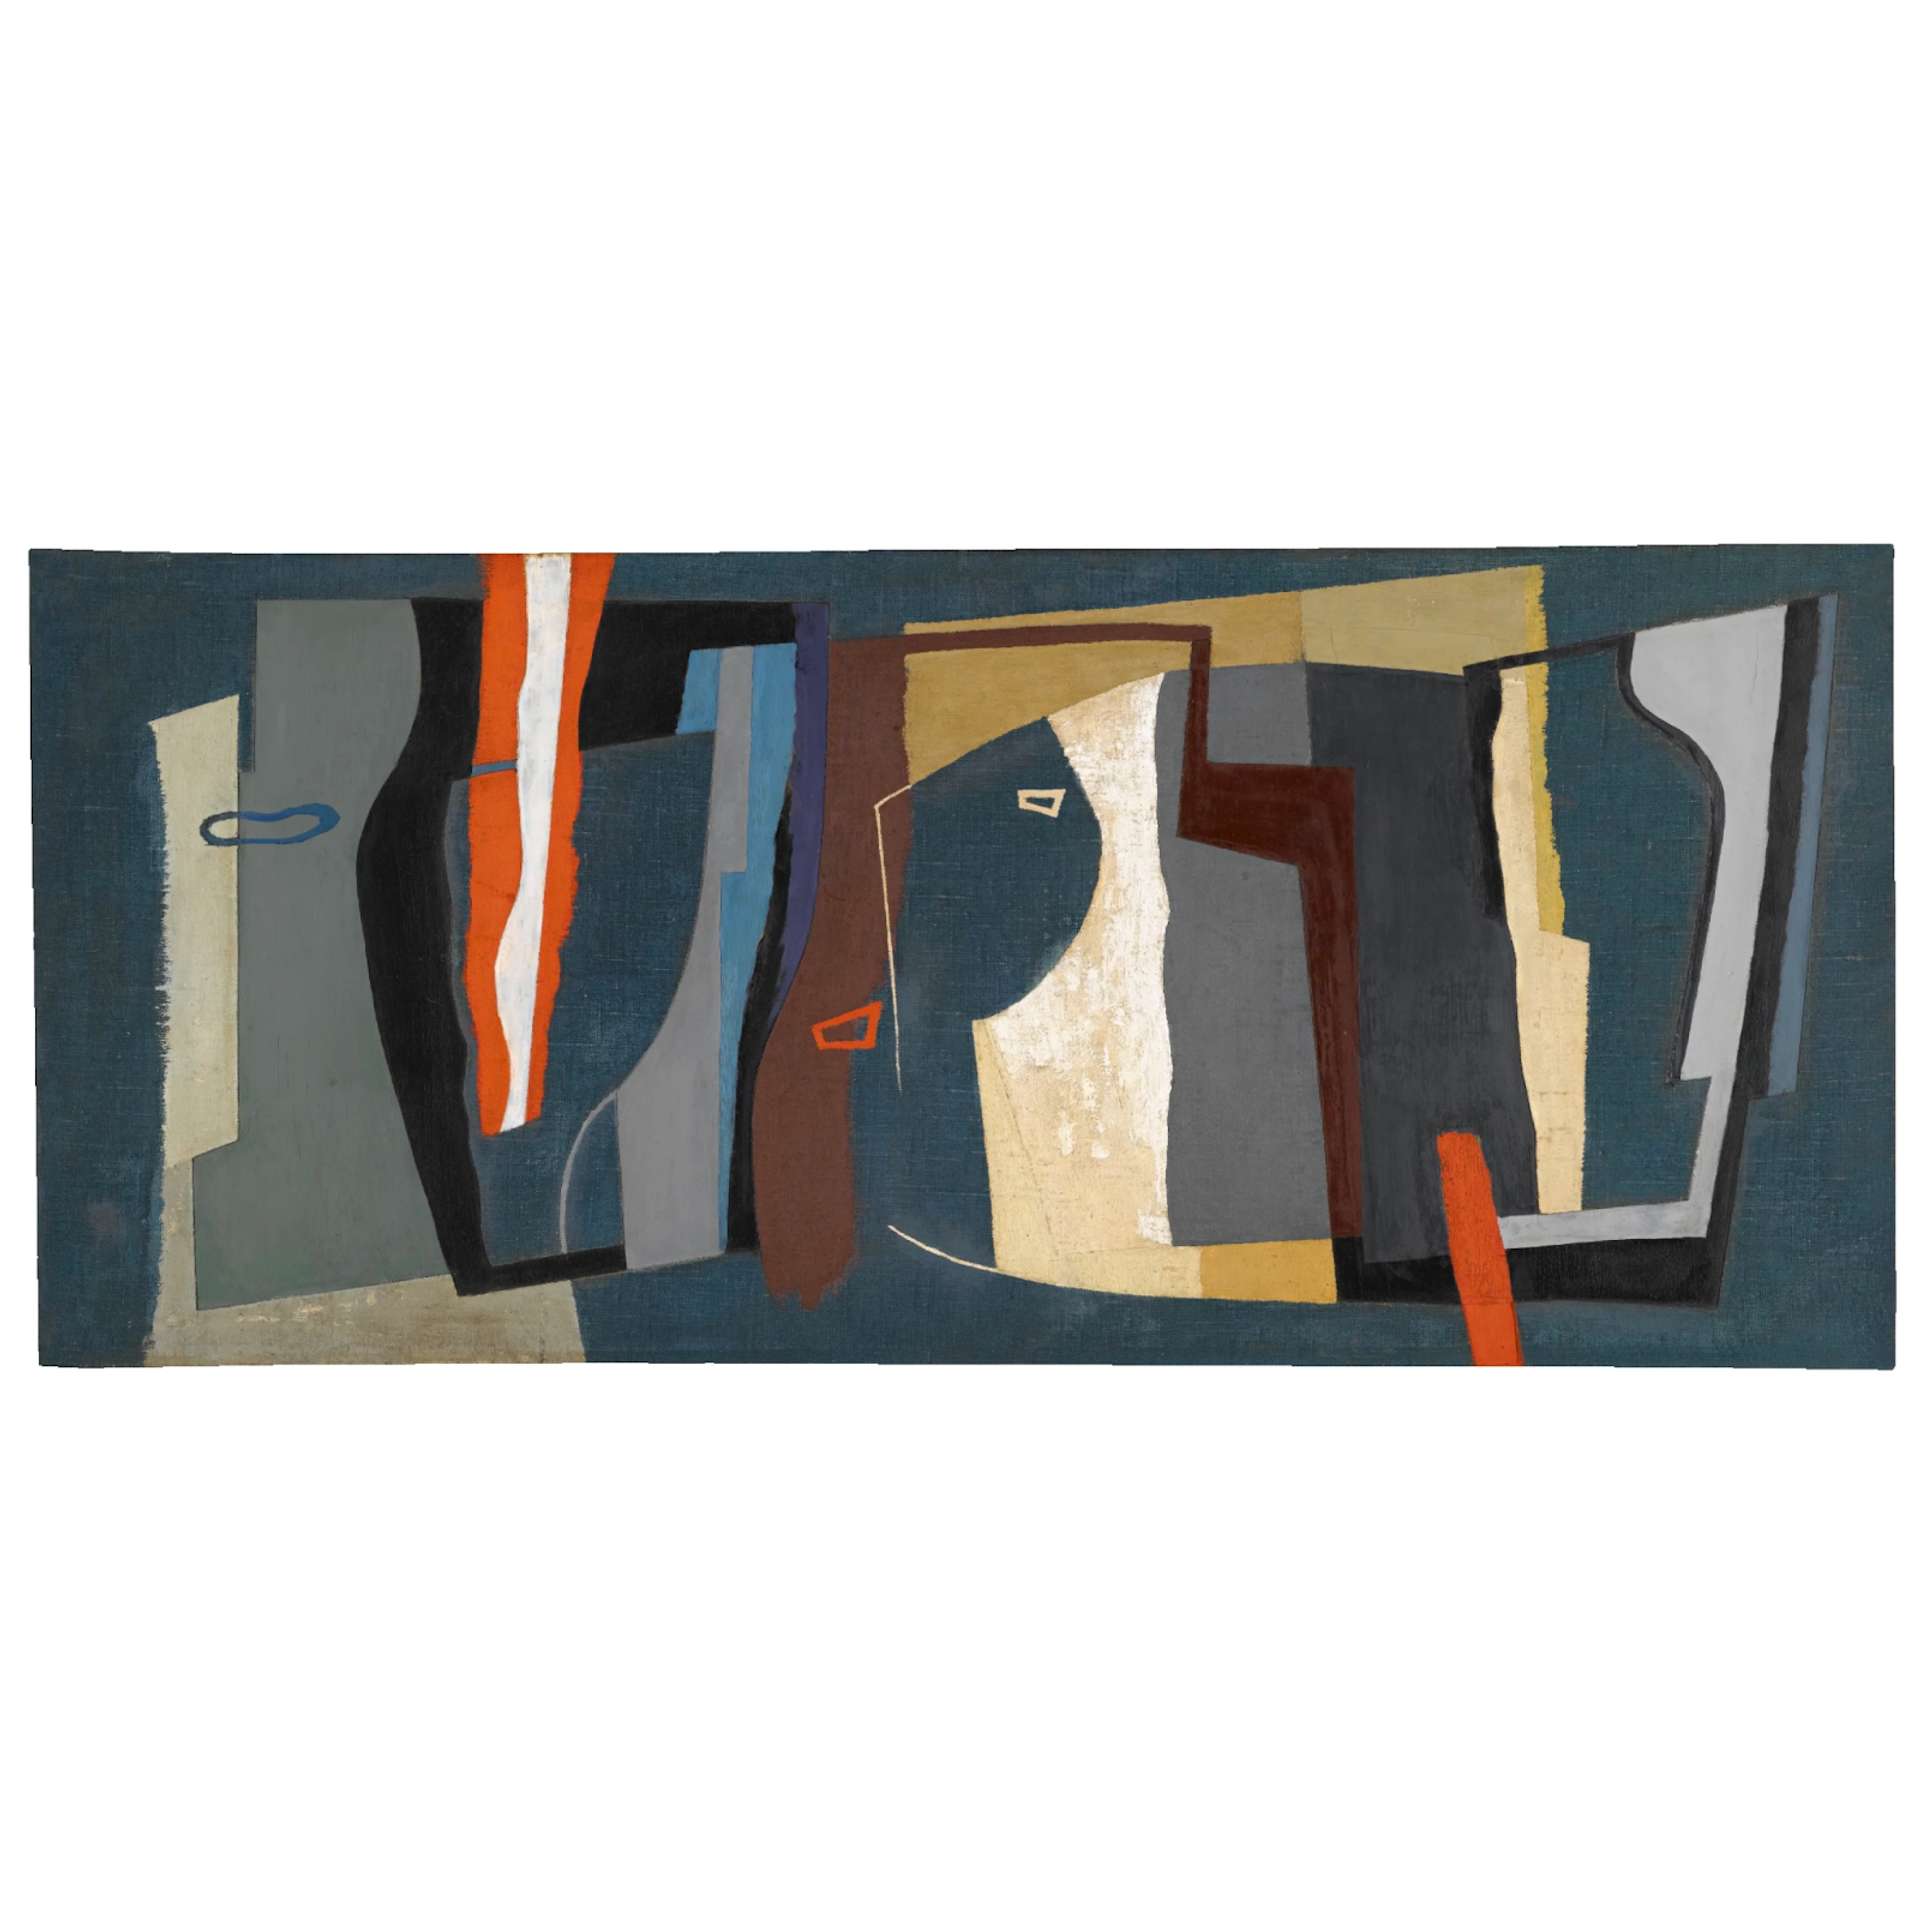  Large diptych canvas with an abstract arrangement of vertical lines in various hues.